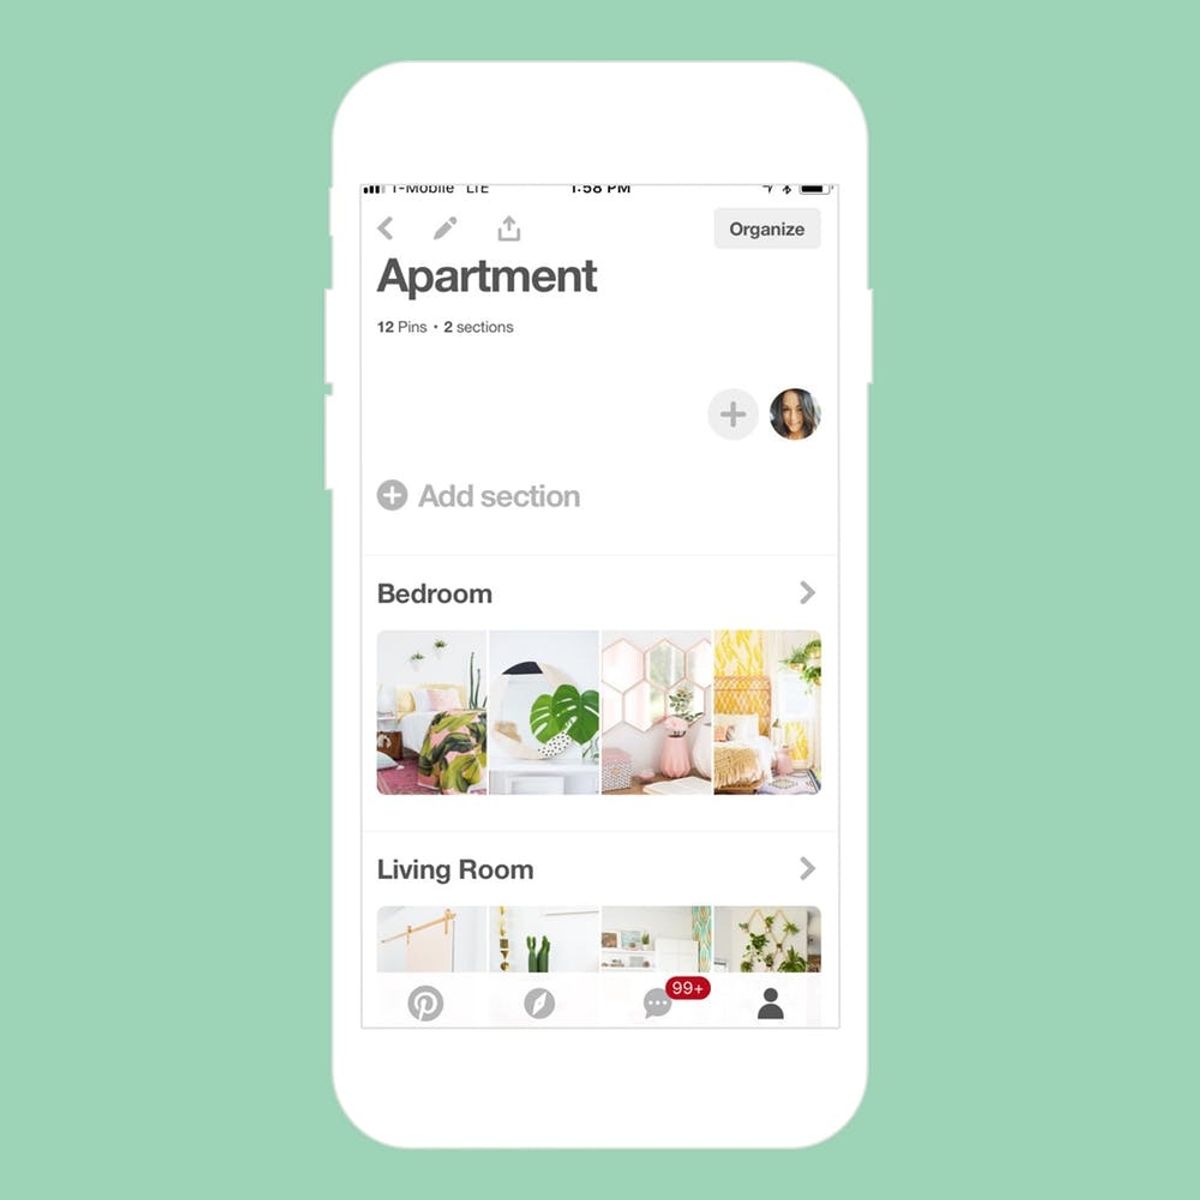 This New Pinterest Feature Is Making It Easier Than Ever to Plan Your Next Home Makeover